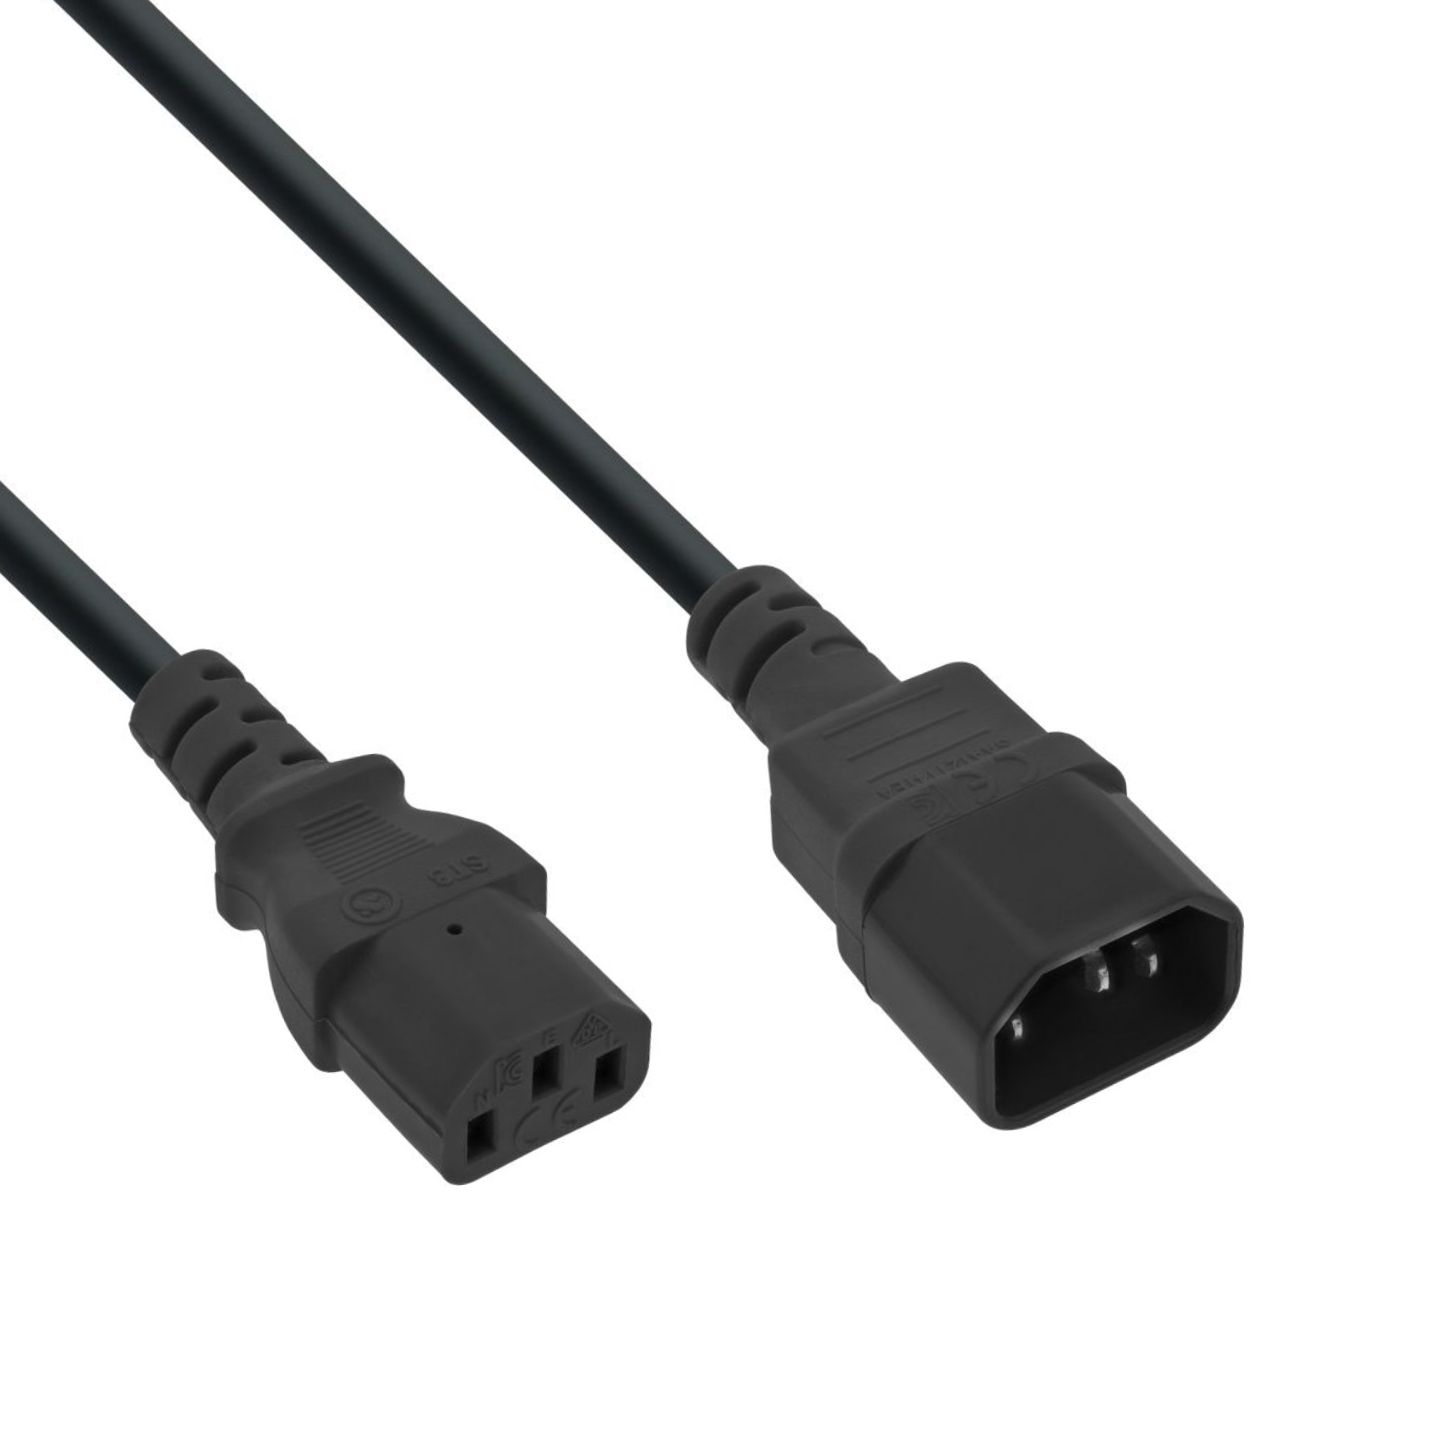 Power cord extension cable C13 to C14 30cm